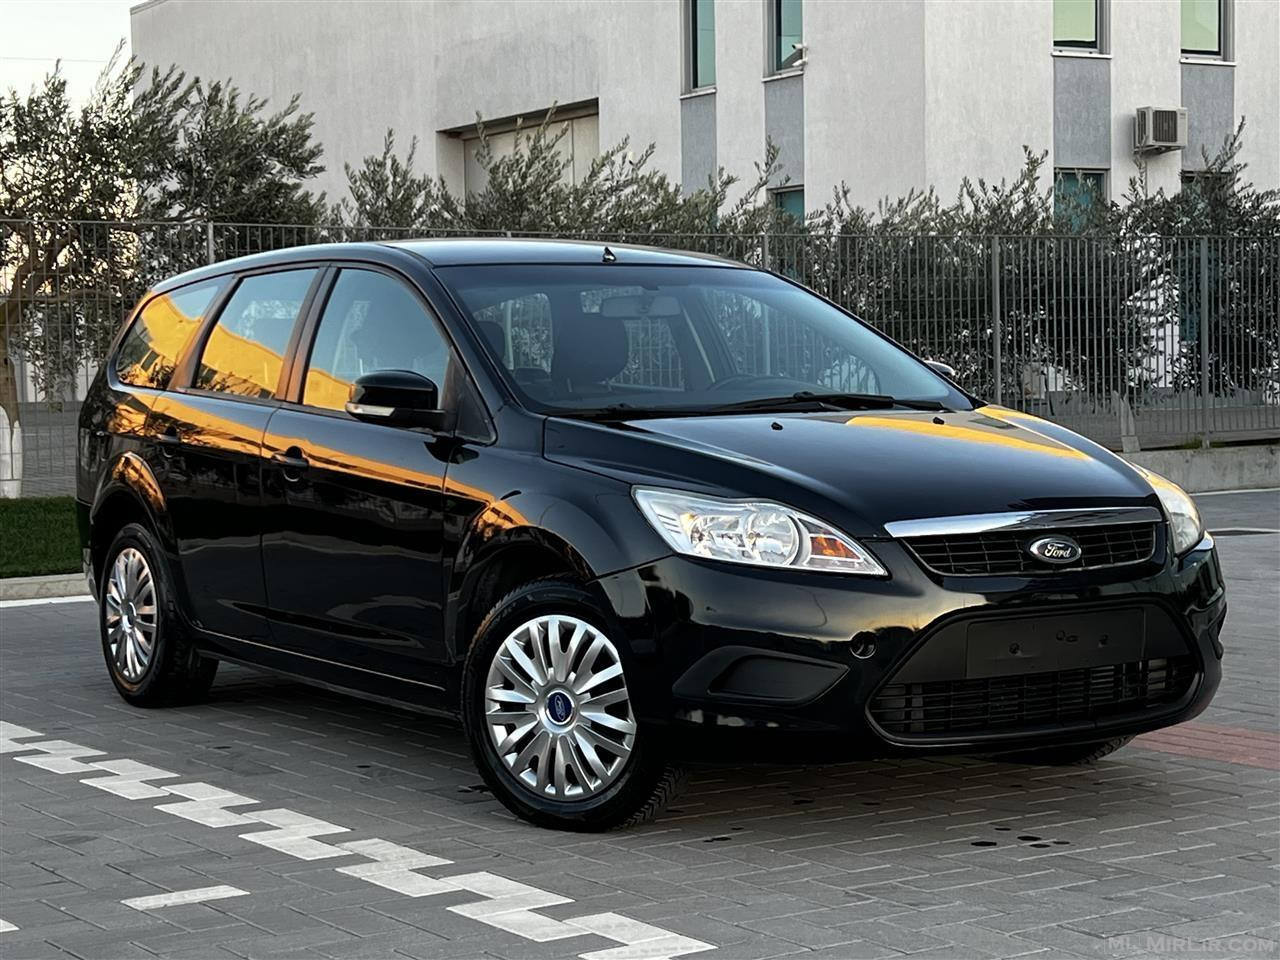 Ford focus 1.6 nfte 2008 